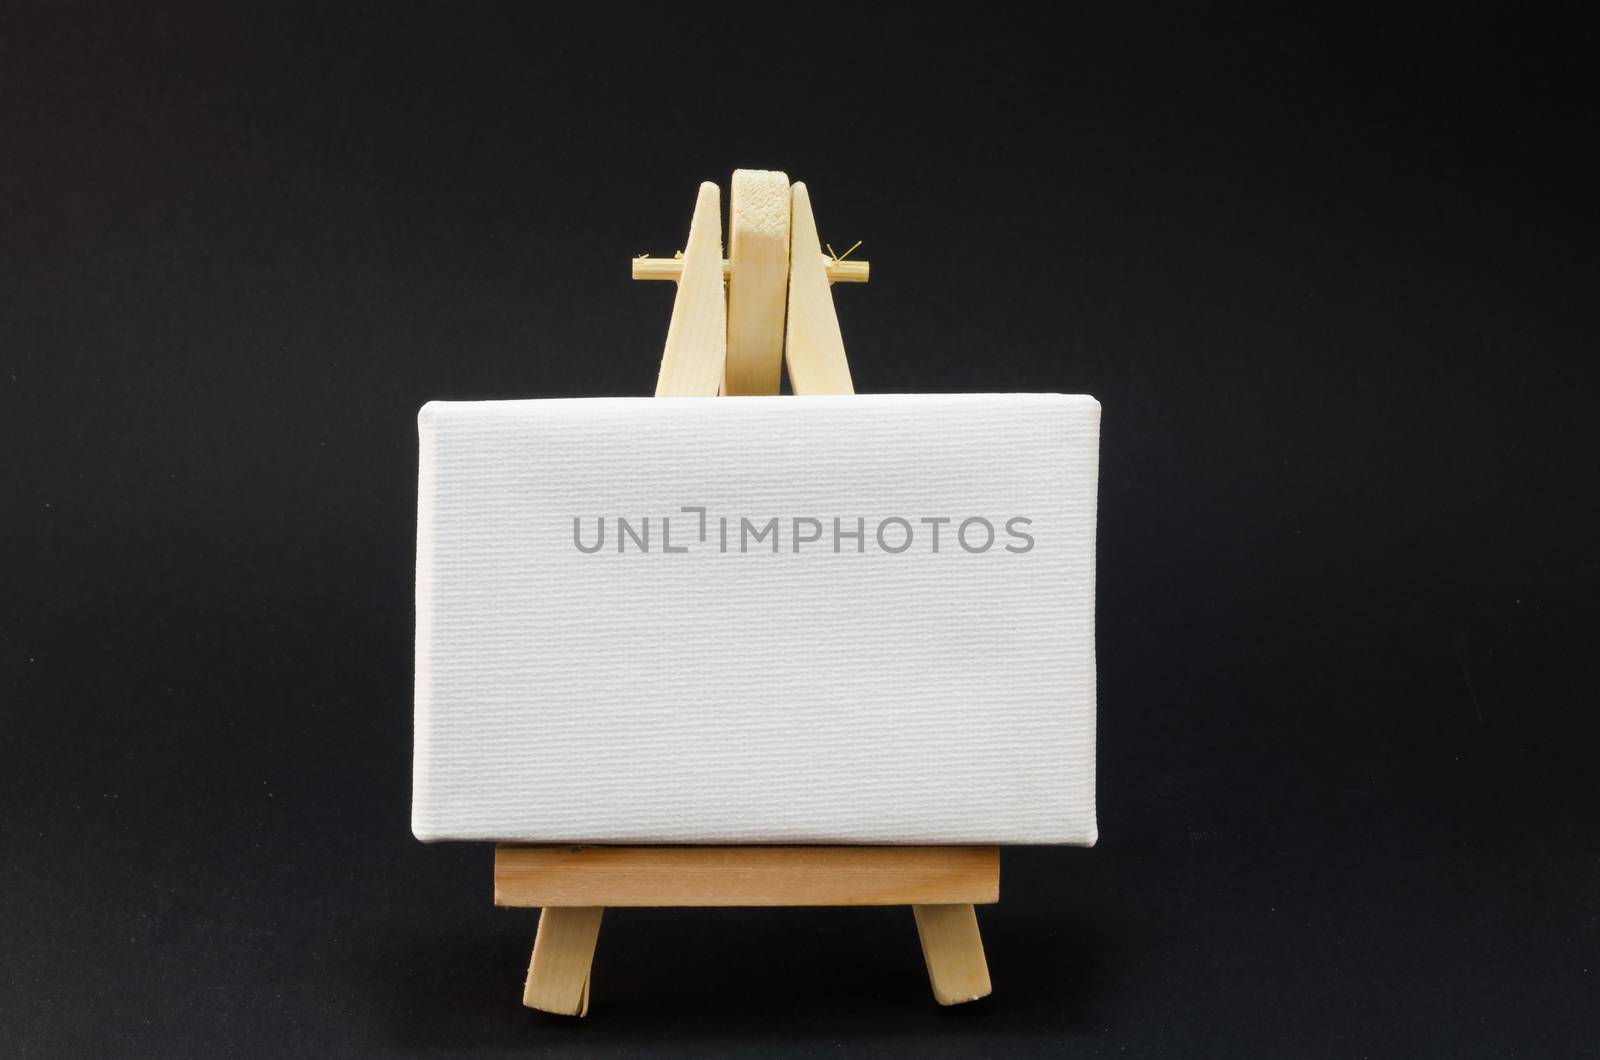 Miniature artist easel, isolated on black background.